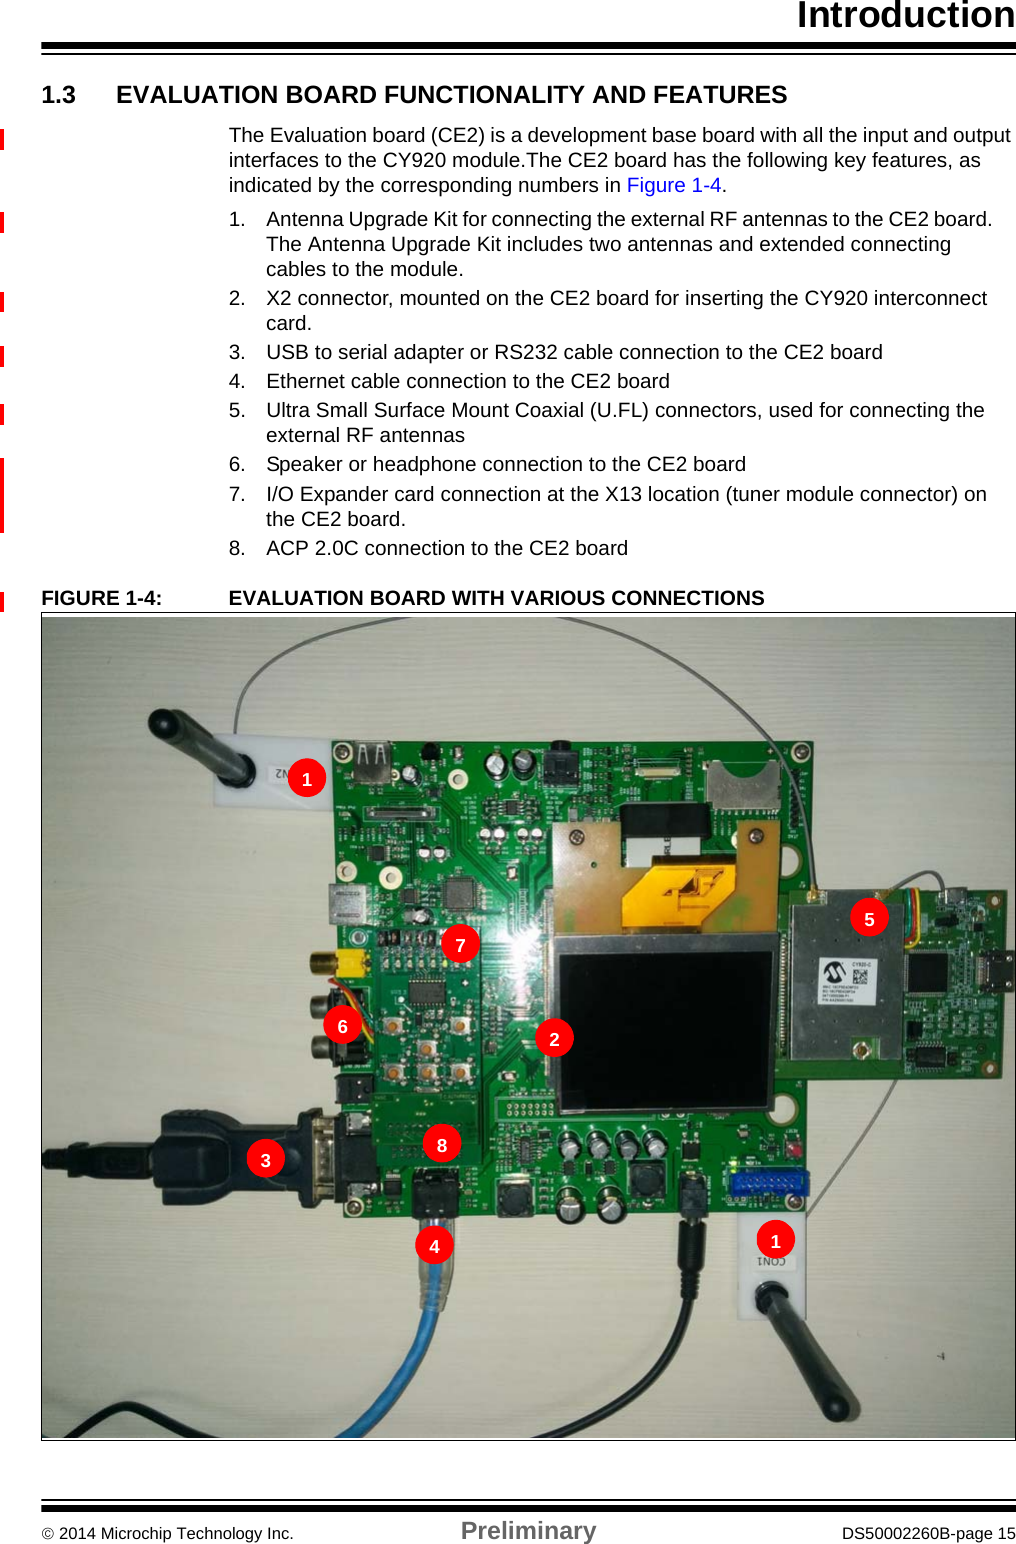 Introduction 2014 Microchip Technology Inc. Preliminary DS50002260B-page 151.3 EVALUATION BOARD FUNCTIONALITY AND FEATURESThe Evaluation board (CE2) is a development base board with all the input and output interfaces to the CY920 module.The CE2 board has the following key features, as indicated by the corresponding numbers in Figure 1-4.1. Antenna Upgrade Kit for connecting the external RF antennas to the CE2 board. The Antenna Upgrade Kit includes two antennas and extended connecting cables to the module.2. X2 connector, mounted on the CE2 board for inserting the CY920 interconnect card.3. USB to serial adapter or RS232 cable connection to the CE2 board4. Ethernet cable connection to the CE2 board5. Ultra Small Surface Mount Coaxial (U.FL) connectors, used for connecting the external RF antennas6. Speaker or headphone connection to the CE2 board7. I/O Expander card connection at the X13 location (tuner module connector) on the CE2 board.8. ACP 2.0C connection to the CE2 boardFIGURE 1-4: EVALUATION BOARD WITH VARIOUS CONNECTIONS112345678